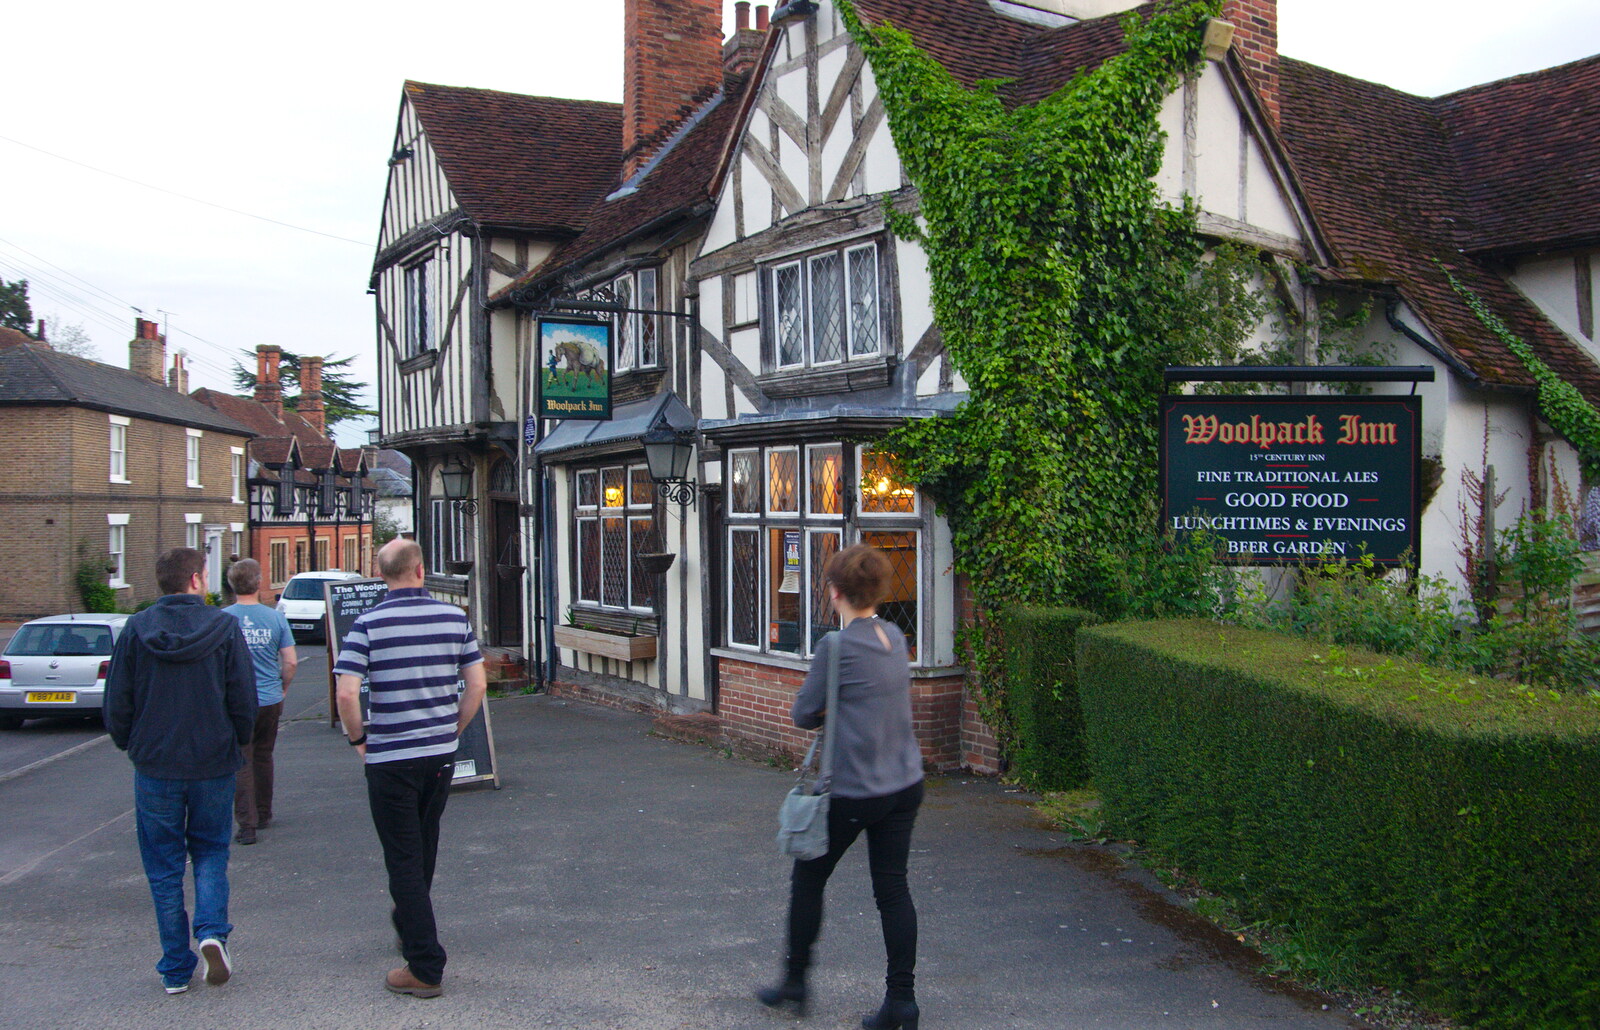 The BSCC Bike Ride 2019, Coggeshall, Essex - 11th May 2019: We arrive at the Woolpack Inn on Church Street